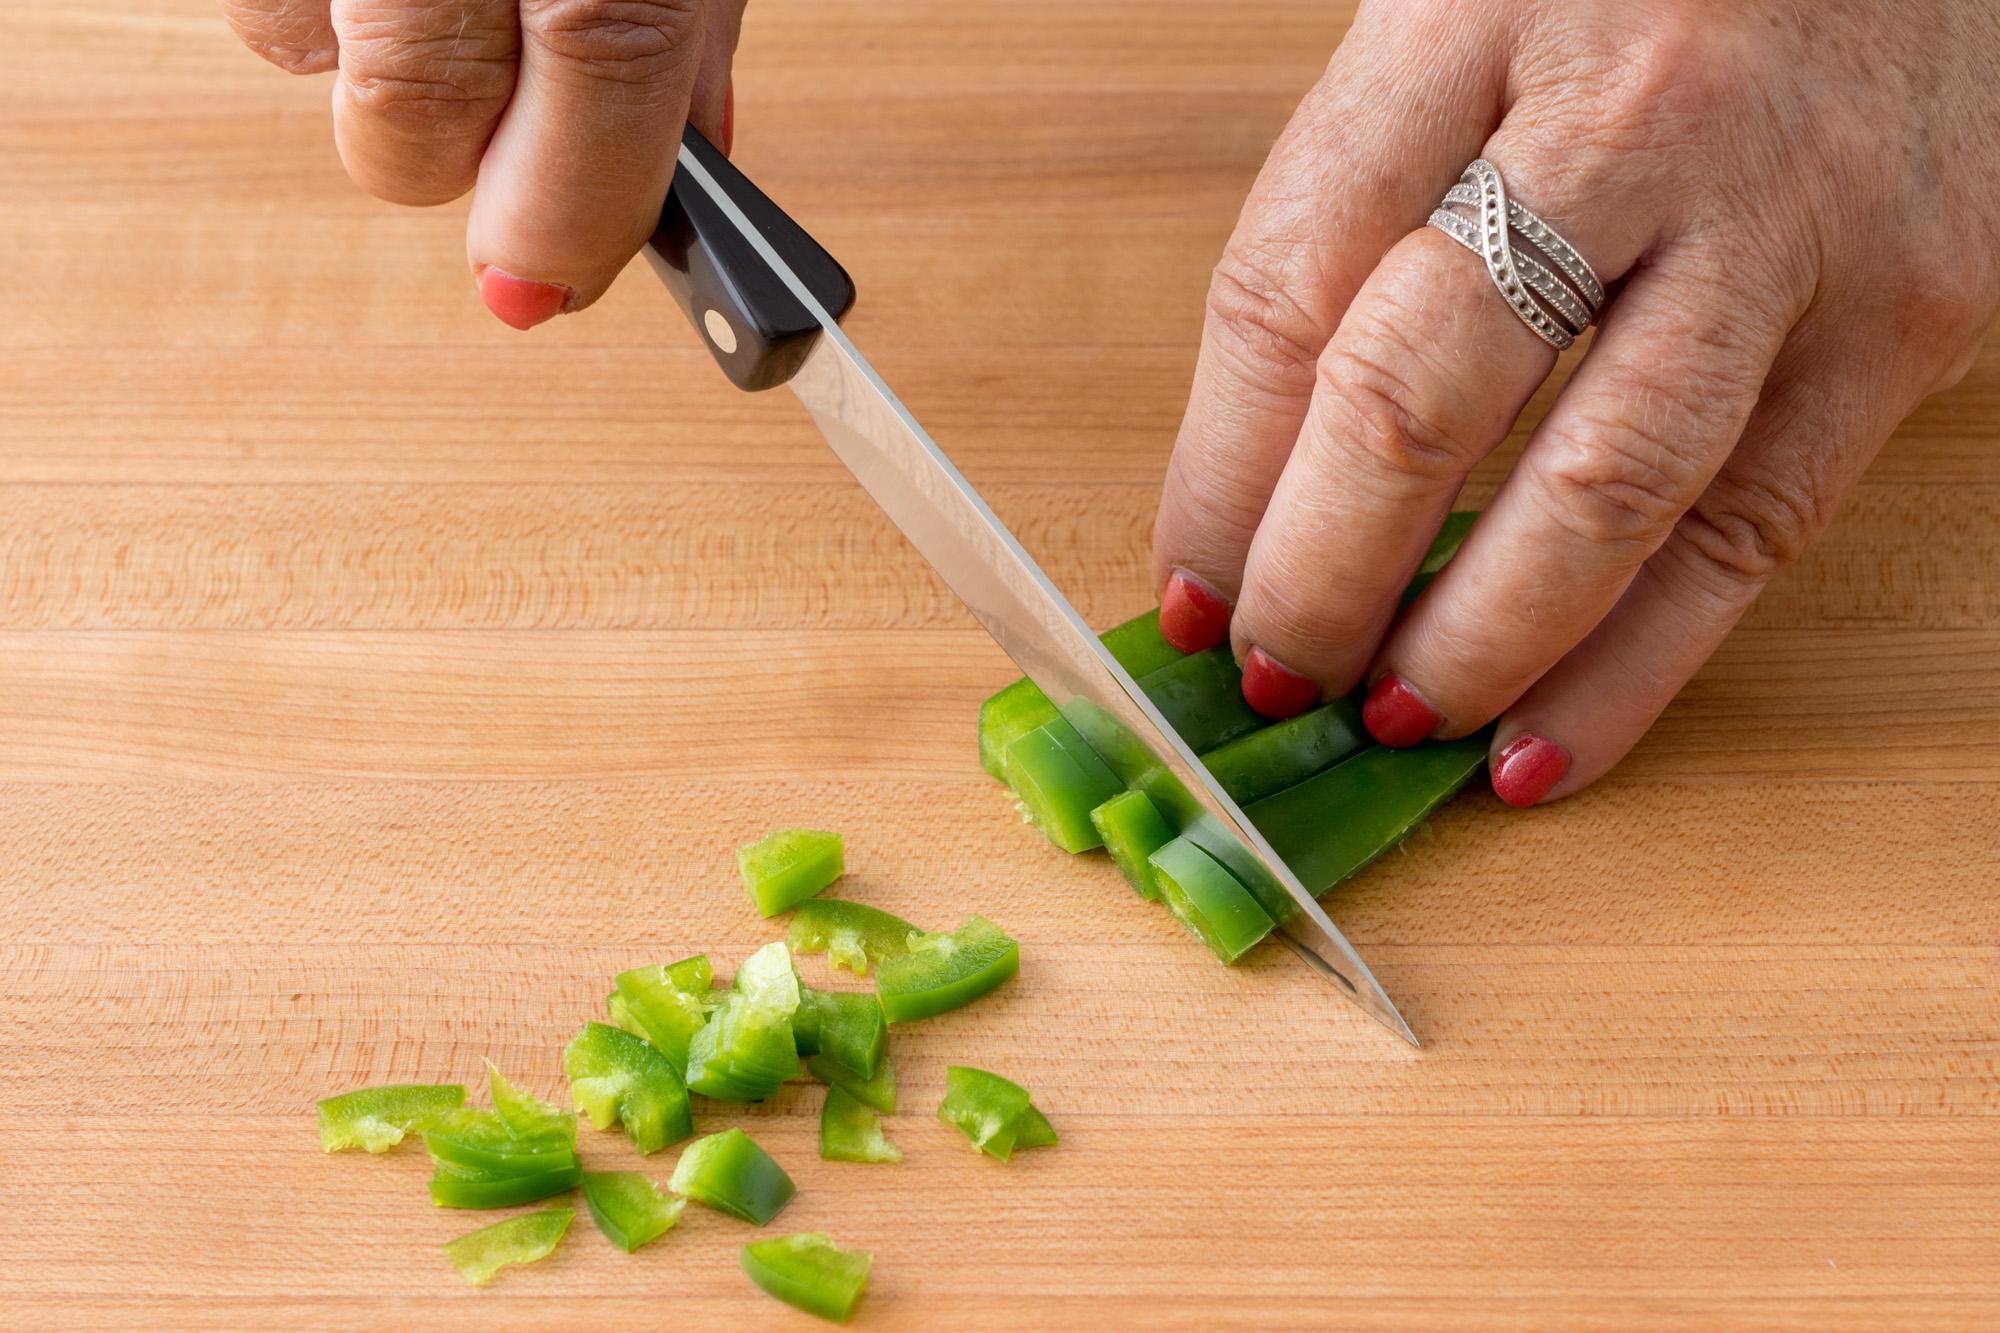 Mincing the jalapeno with a 4 Inch Gourmet Paring Knife.